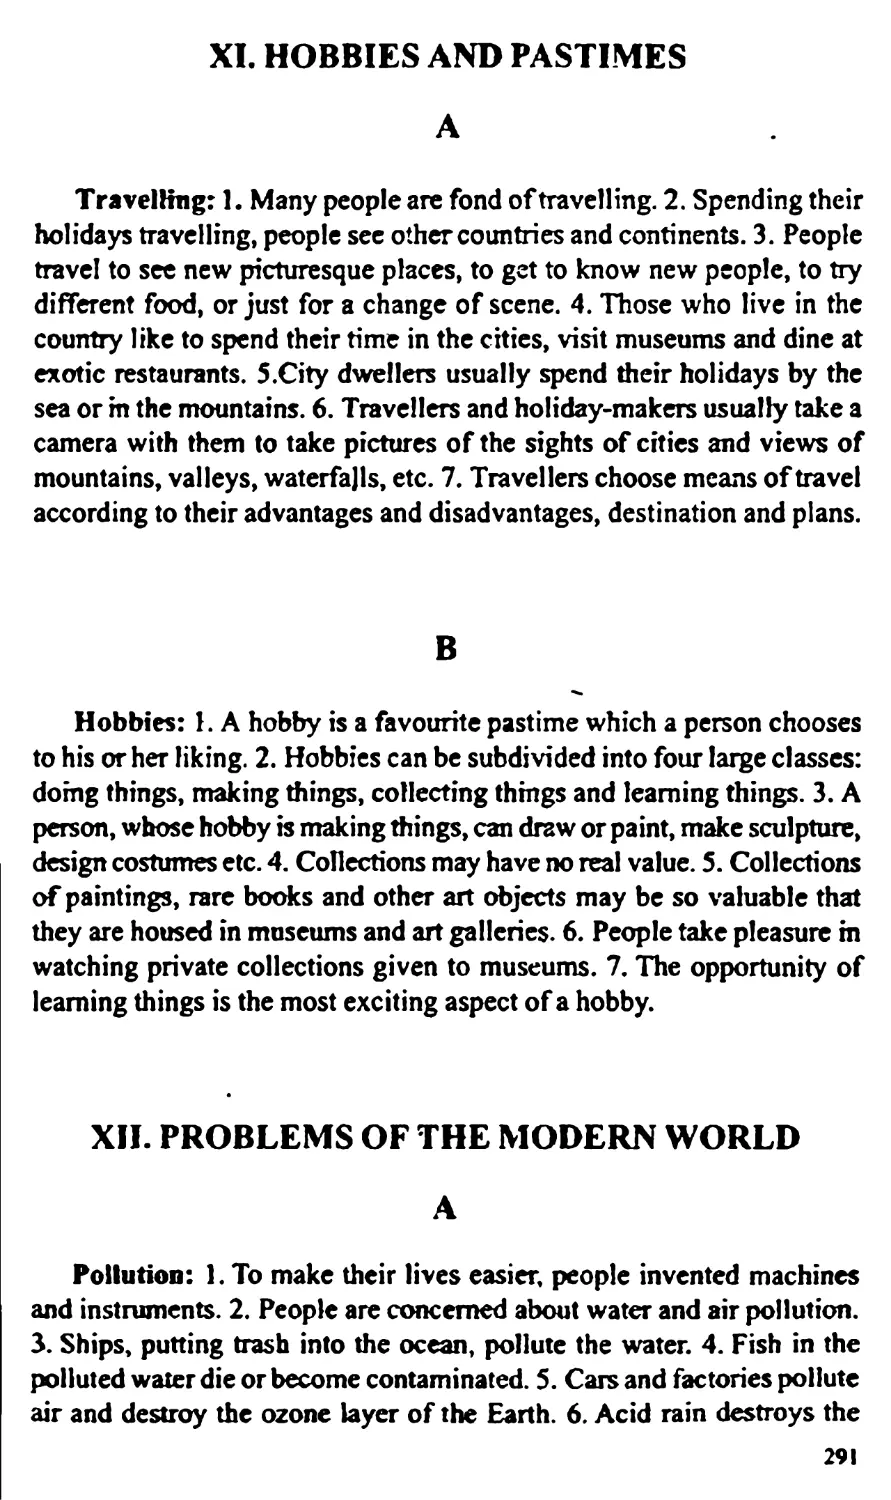 XI.	HOBBIES AND PASTIMES
XII.	PROBLEMS OF THE MODERN WORLD